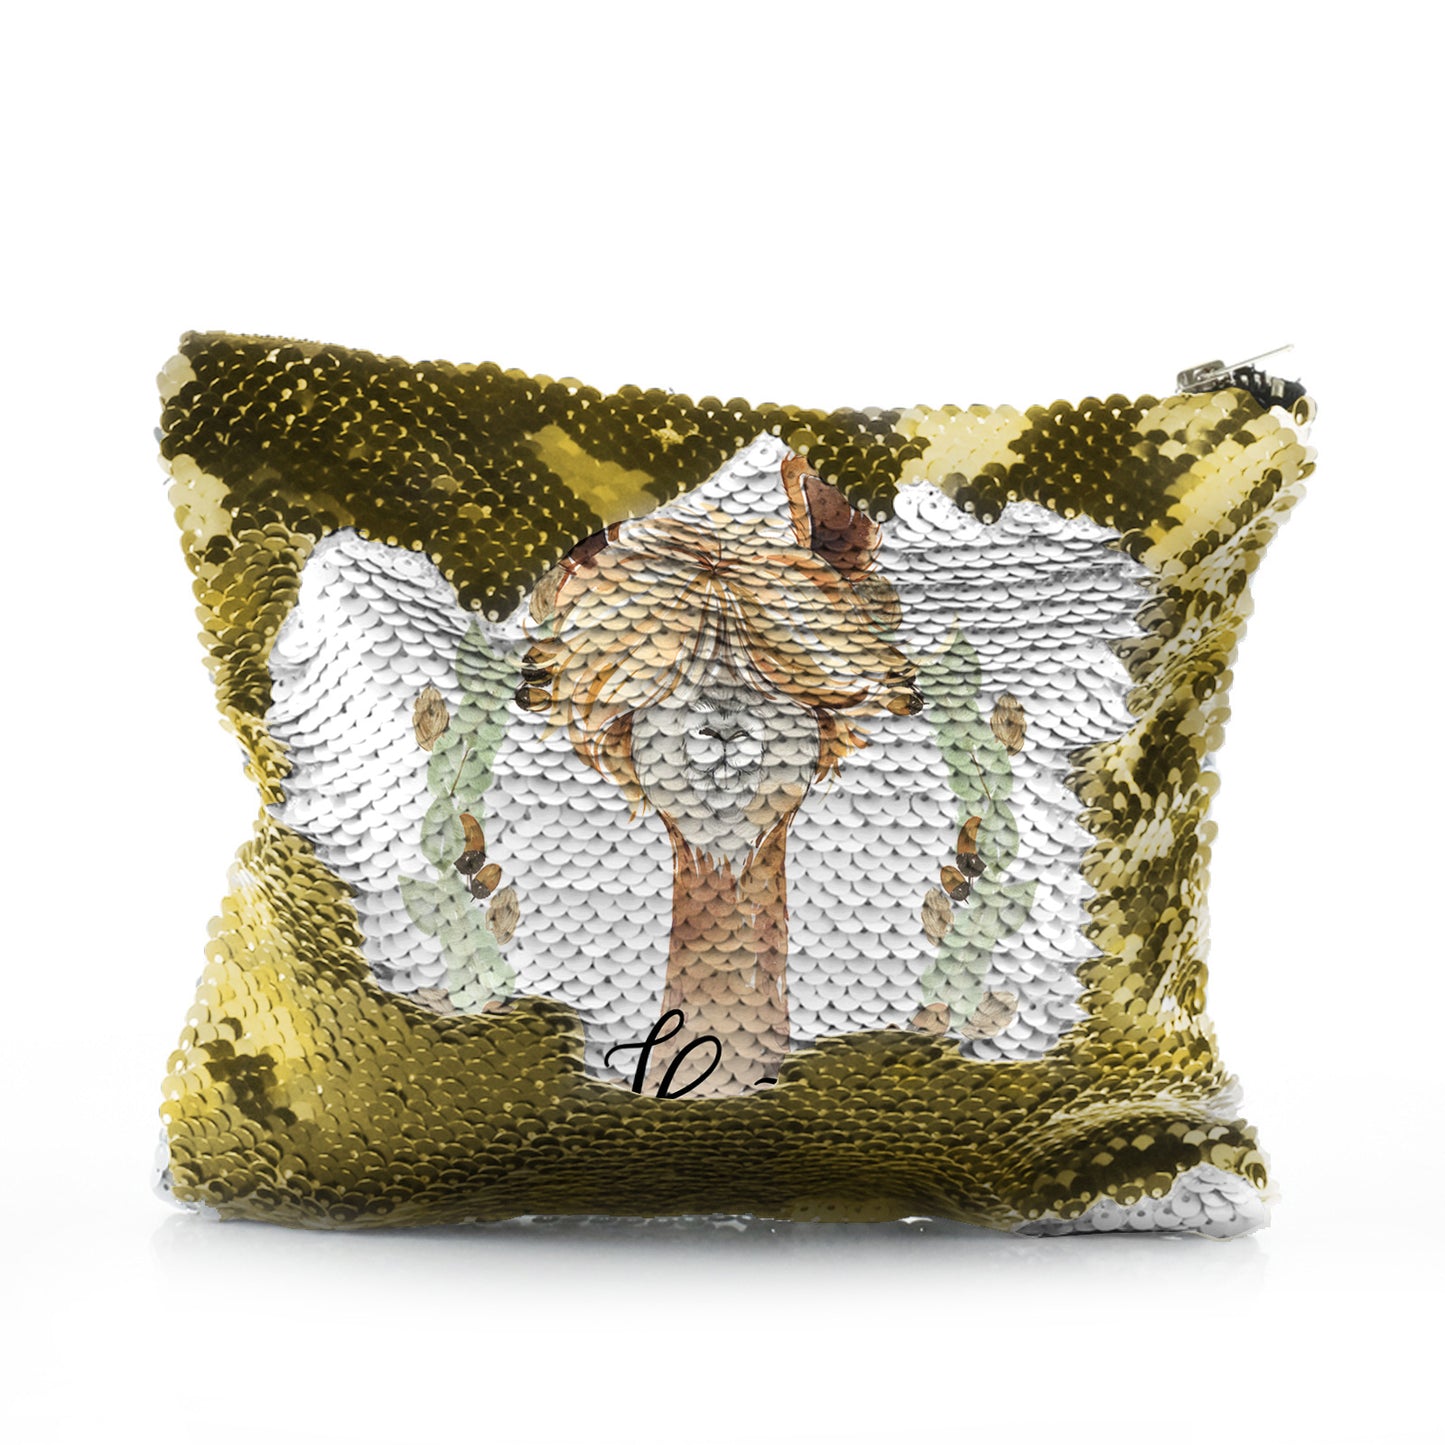 Personalised Sequin Zip Bag with Brown Alpaca Acorn Wreath and Cute Text